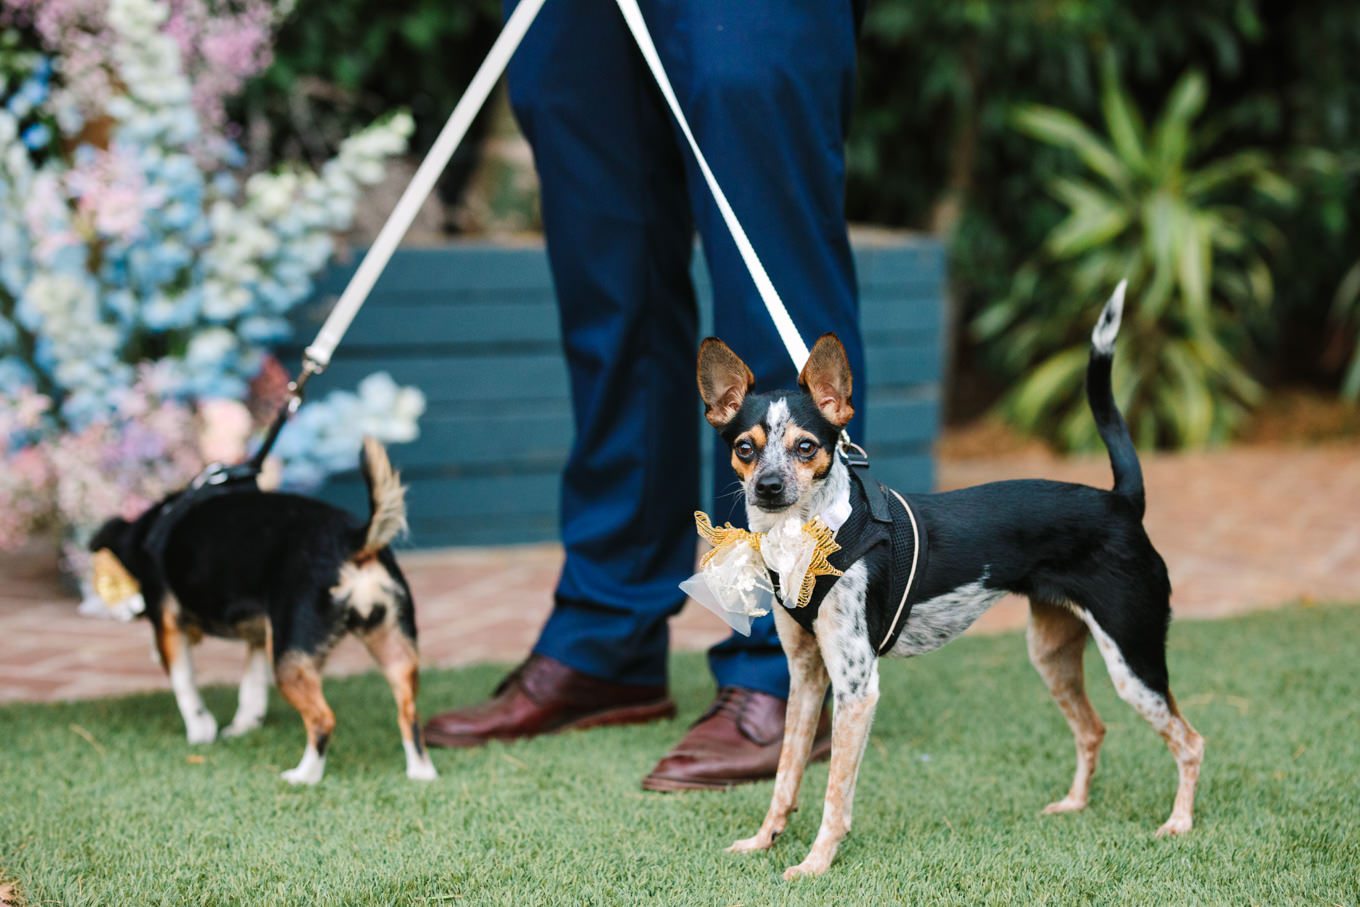 Dogs in wedding ceremony | Colorful pop-up micro wedding at The Ruby Street Los Angeles featured on Green Wedding Shoes | Colorful and elevated photography for fun-loving couples in Southern California | #colorfulwedding #popupwedding #weddingphotography #microwedding Source: Mary Costa Photography | Los Angeles